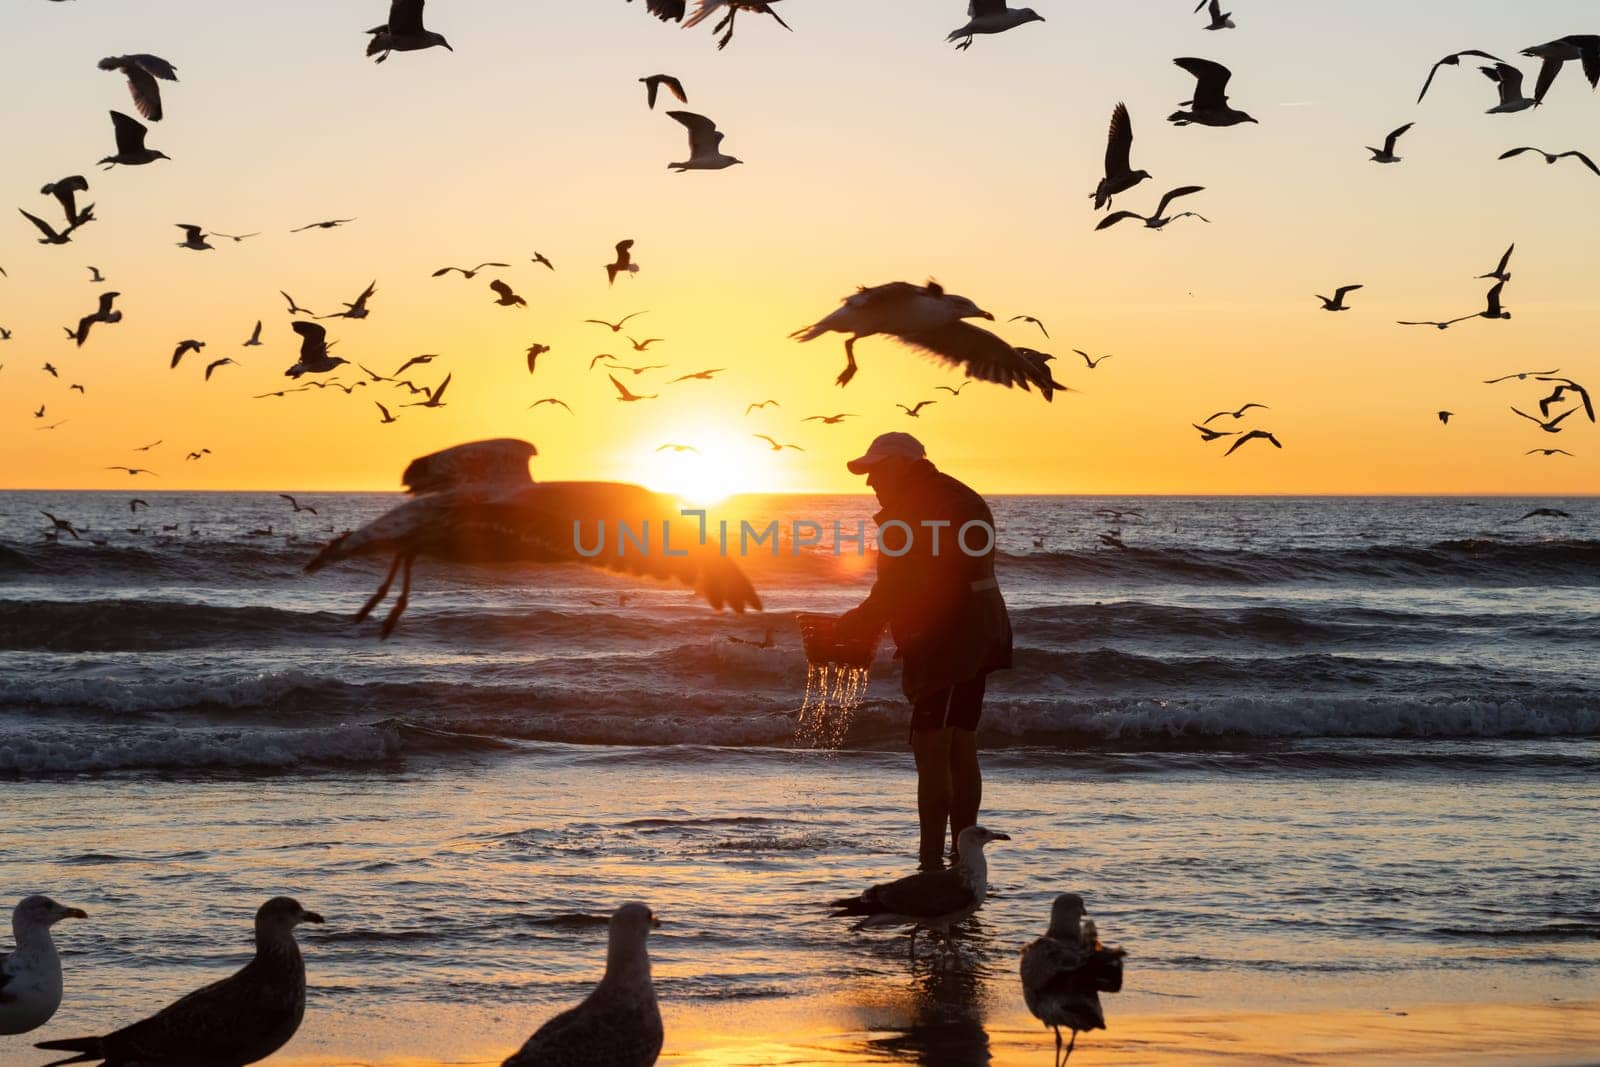 14 october 2022 Lisbon, Portugal: a man stands on the seashore at a bright sunset and washes the caught fish while seagulls fly around. Mid shot